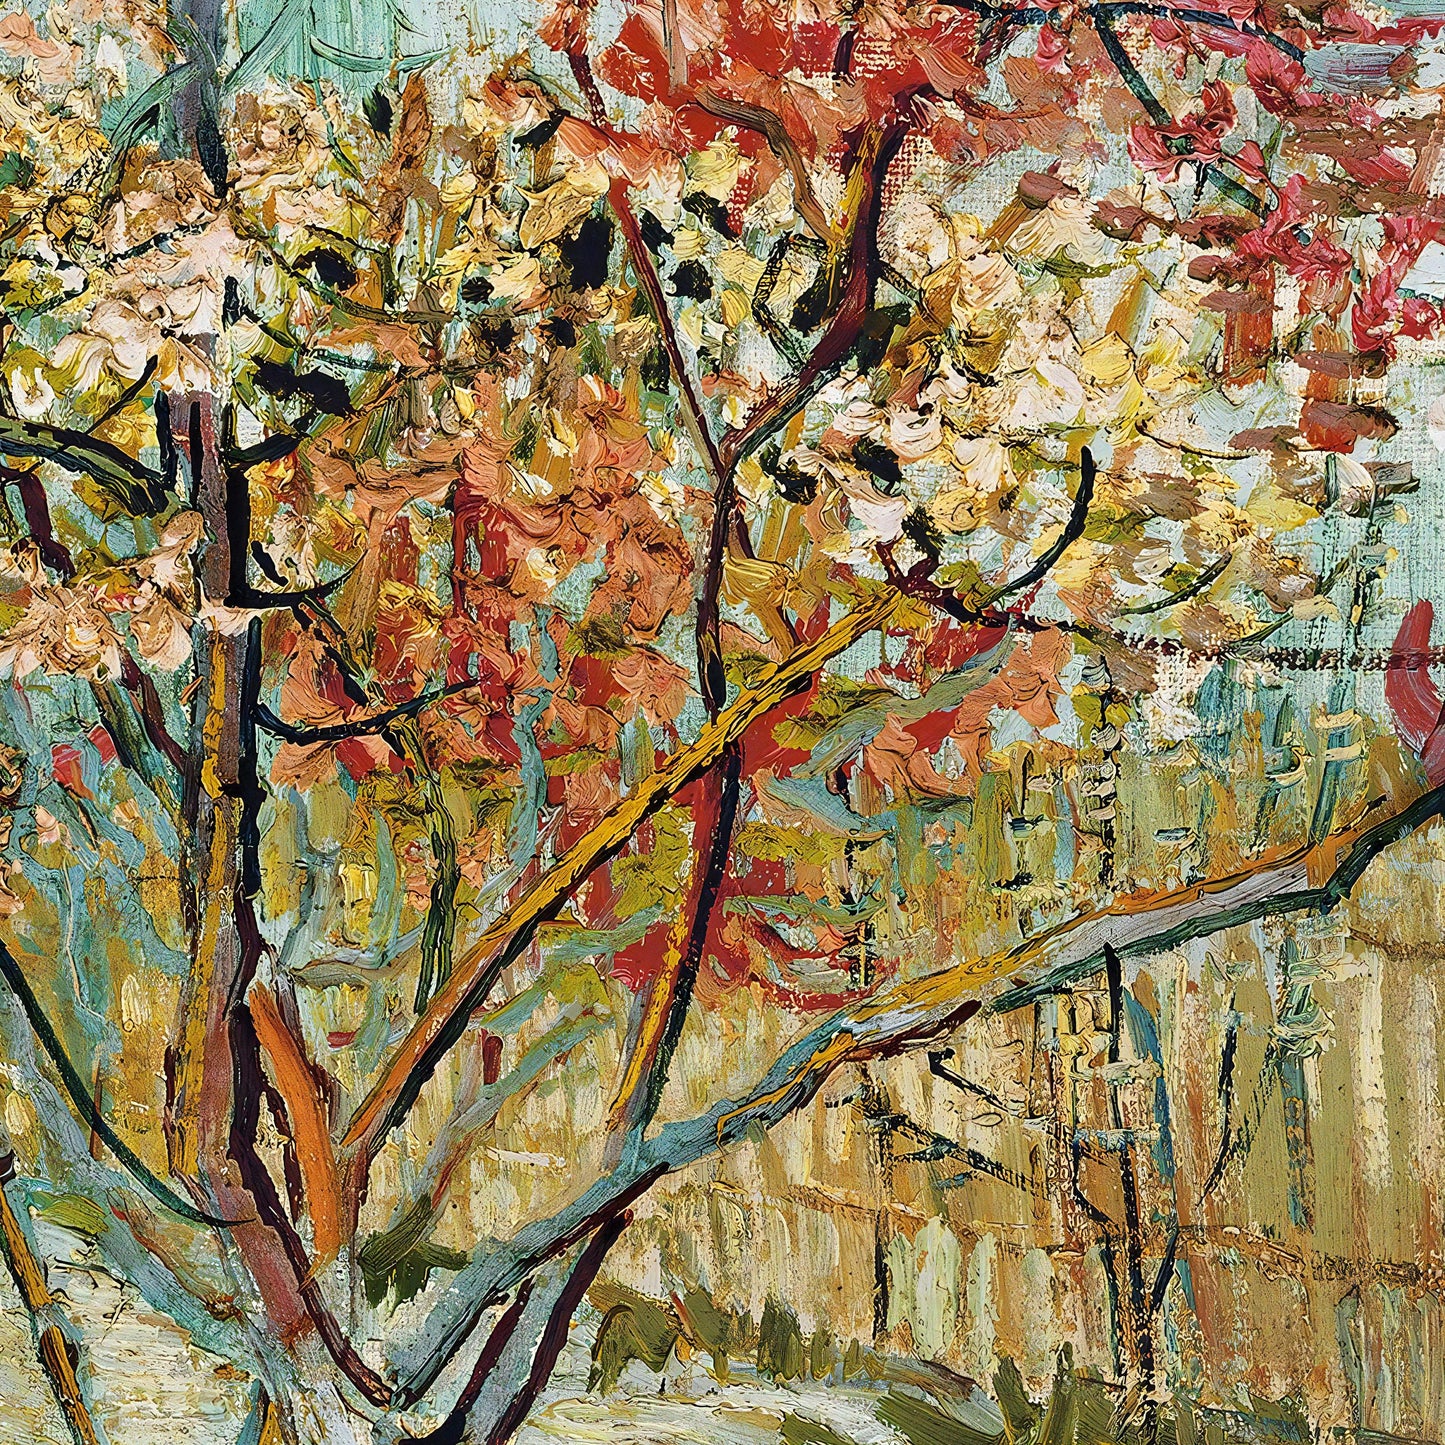 Pink Peach Trees by Vincent Van Gogh, 3d Printed with texture and brush strokes looks like original oil-painting, code:061